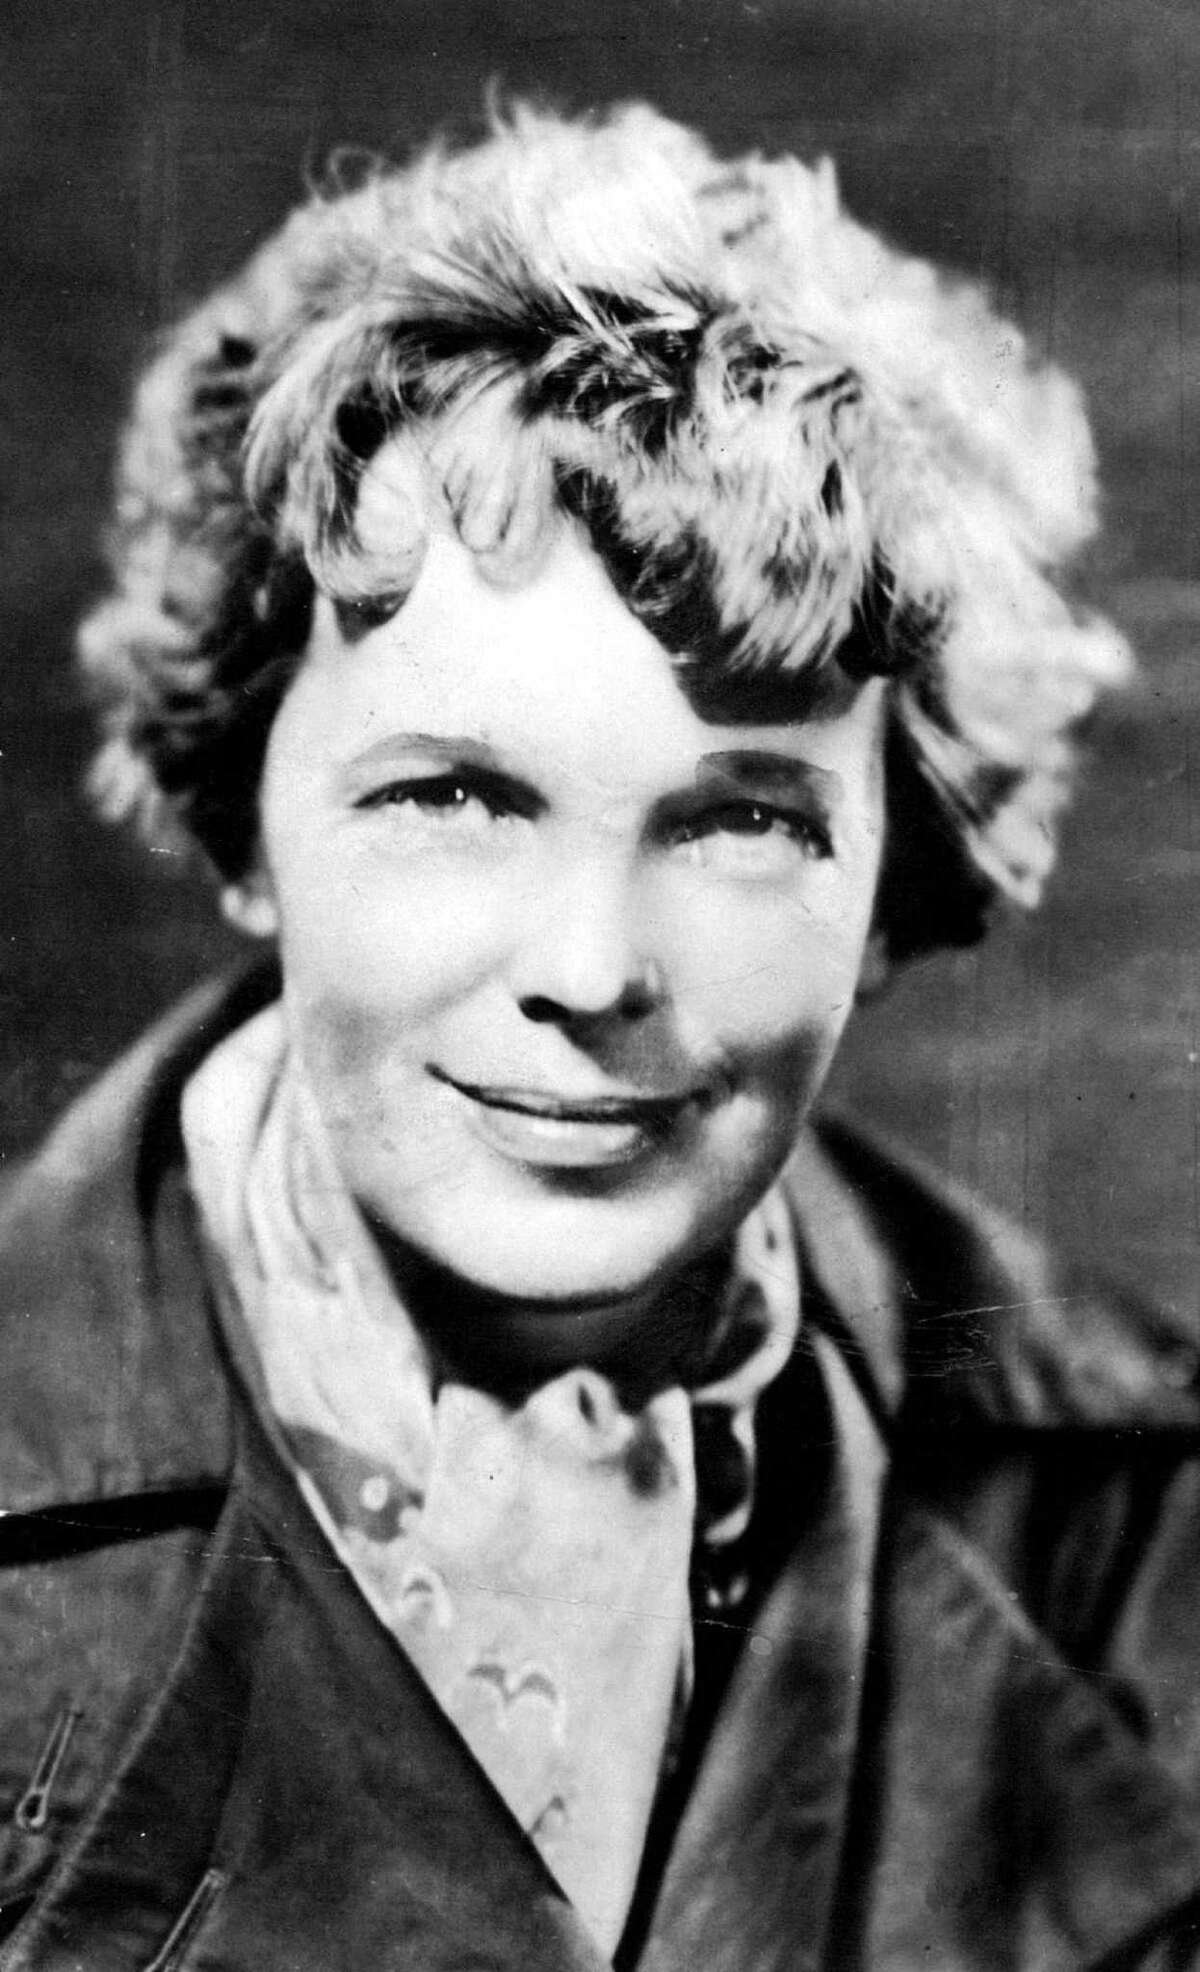 This undated photo shows Amelia Earhart. Earhart investigator Ric Gillespie hopes that modern computer enhancements of a part of the photo of Earhart's plane will link it to a piece of possible airplane wreckage discovered a quarter century ago on a tiny Pacific island in the area where Earhart disappeared. (AP Photo/The Miami Herald)